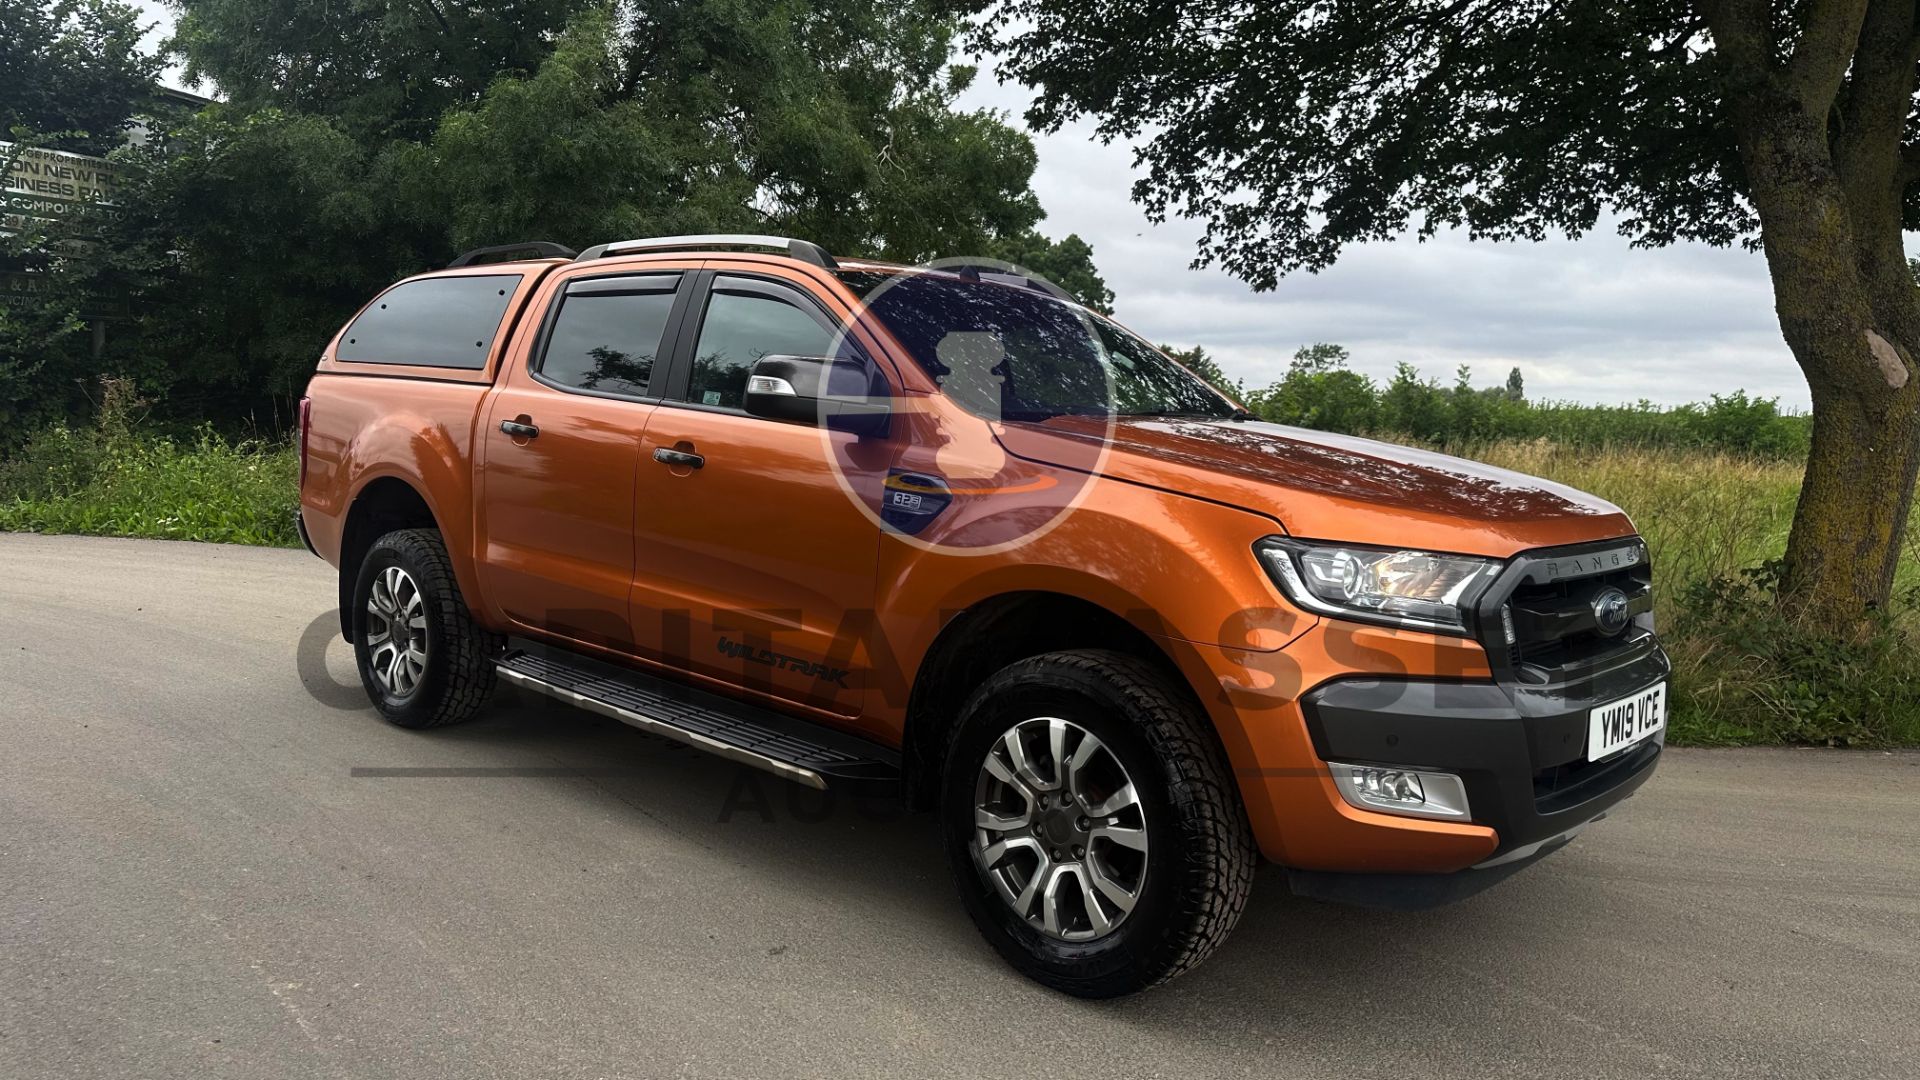 (ON SALE) FORD RANGER *WILDTRAK EDITION* DOUBLE CAB PICK-UP (2019 - EURO 6) 3.2 TDCI - AUTOMATIC - Image 3 of 53